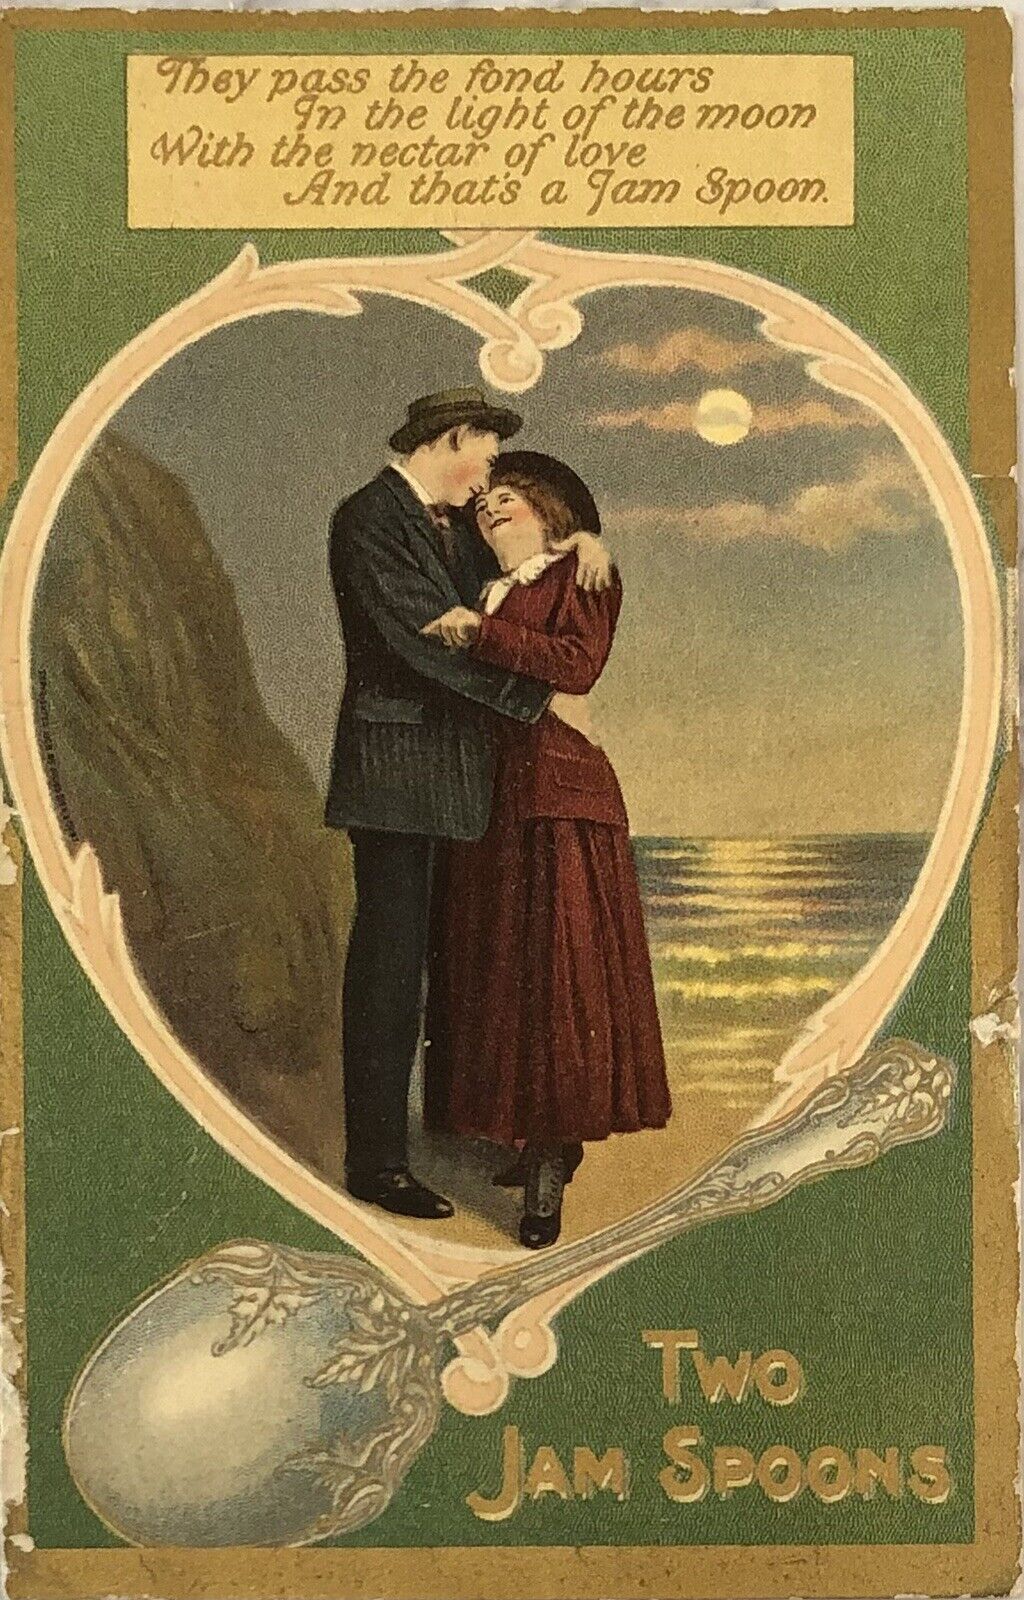 Postcard Vintage Romantic. Two Ppl Embracing  Silver Spoon  1910 Stamp